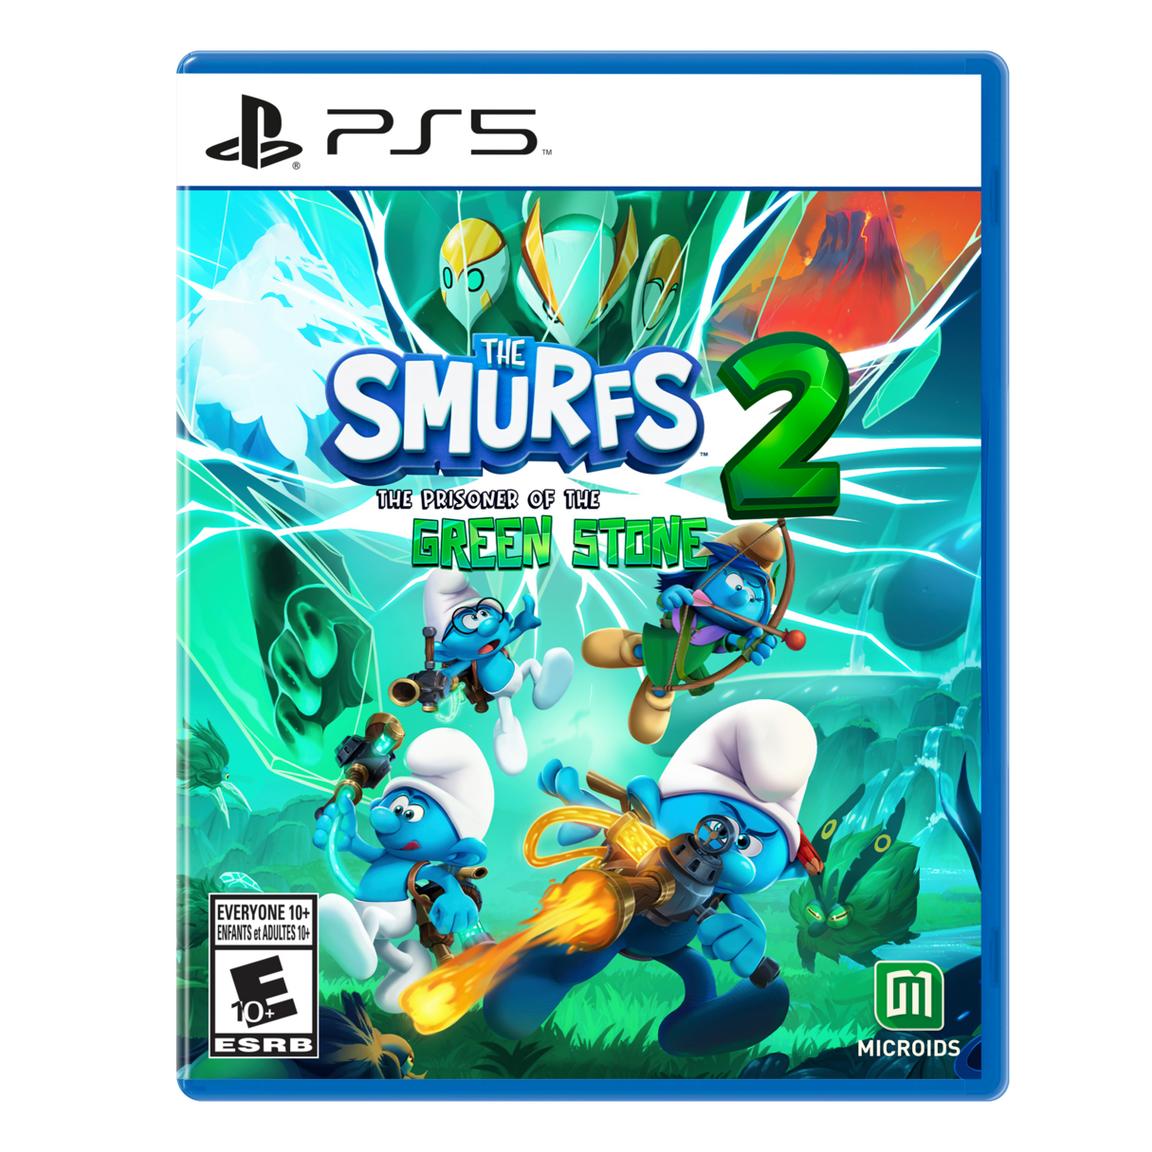 Видеоигра The Smurfs 2: Prisoner of the Green Stone - PlayStation 5 ps5 игра microids arkanoid eternal battle limited edition